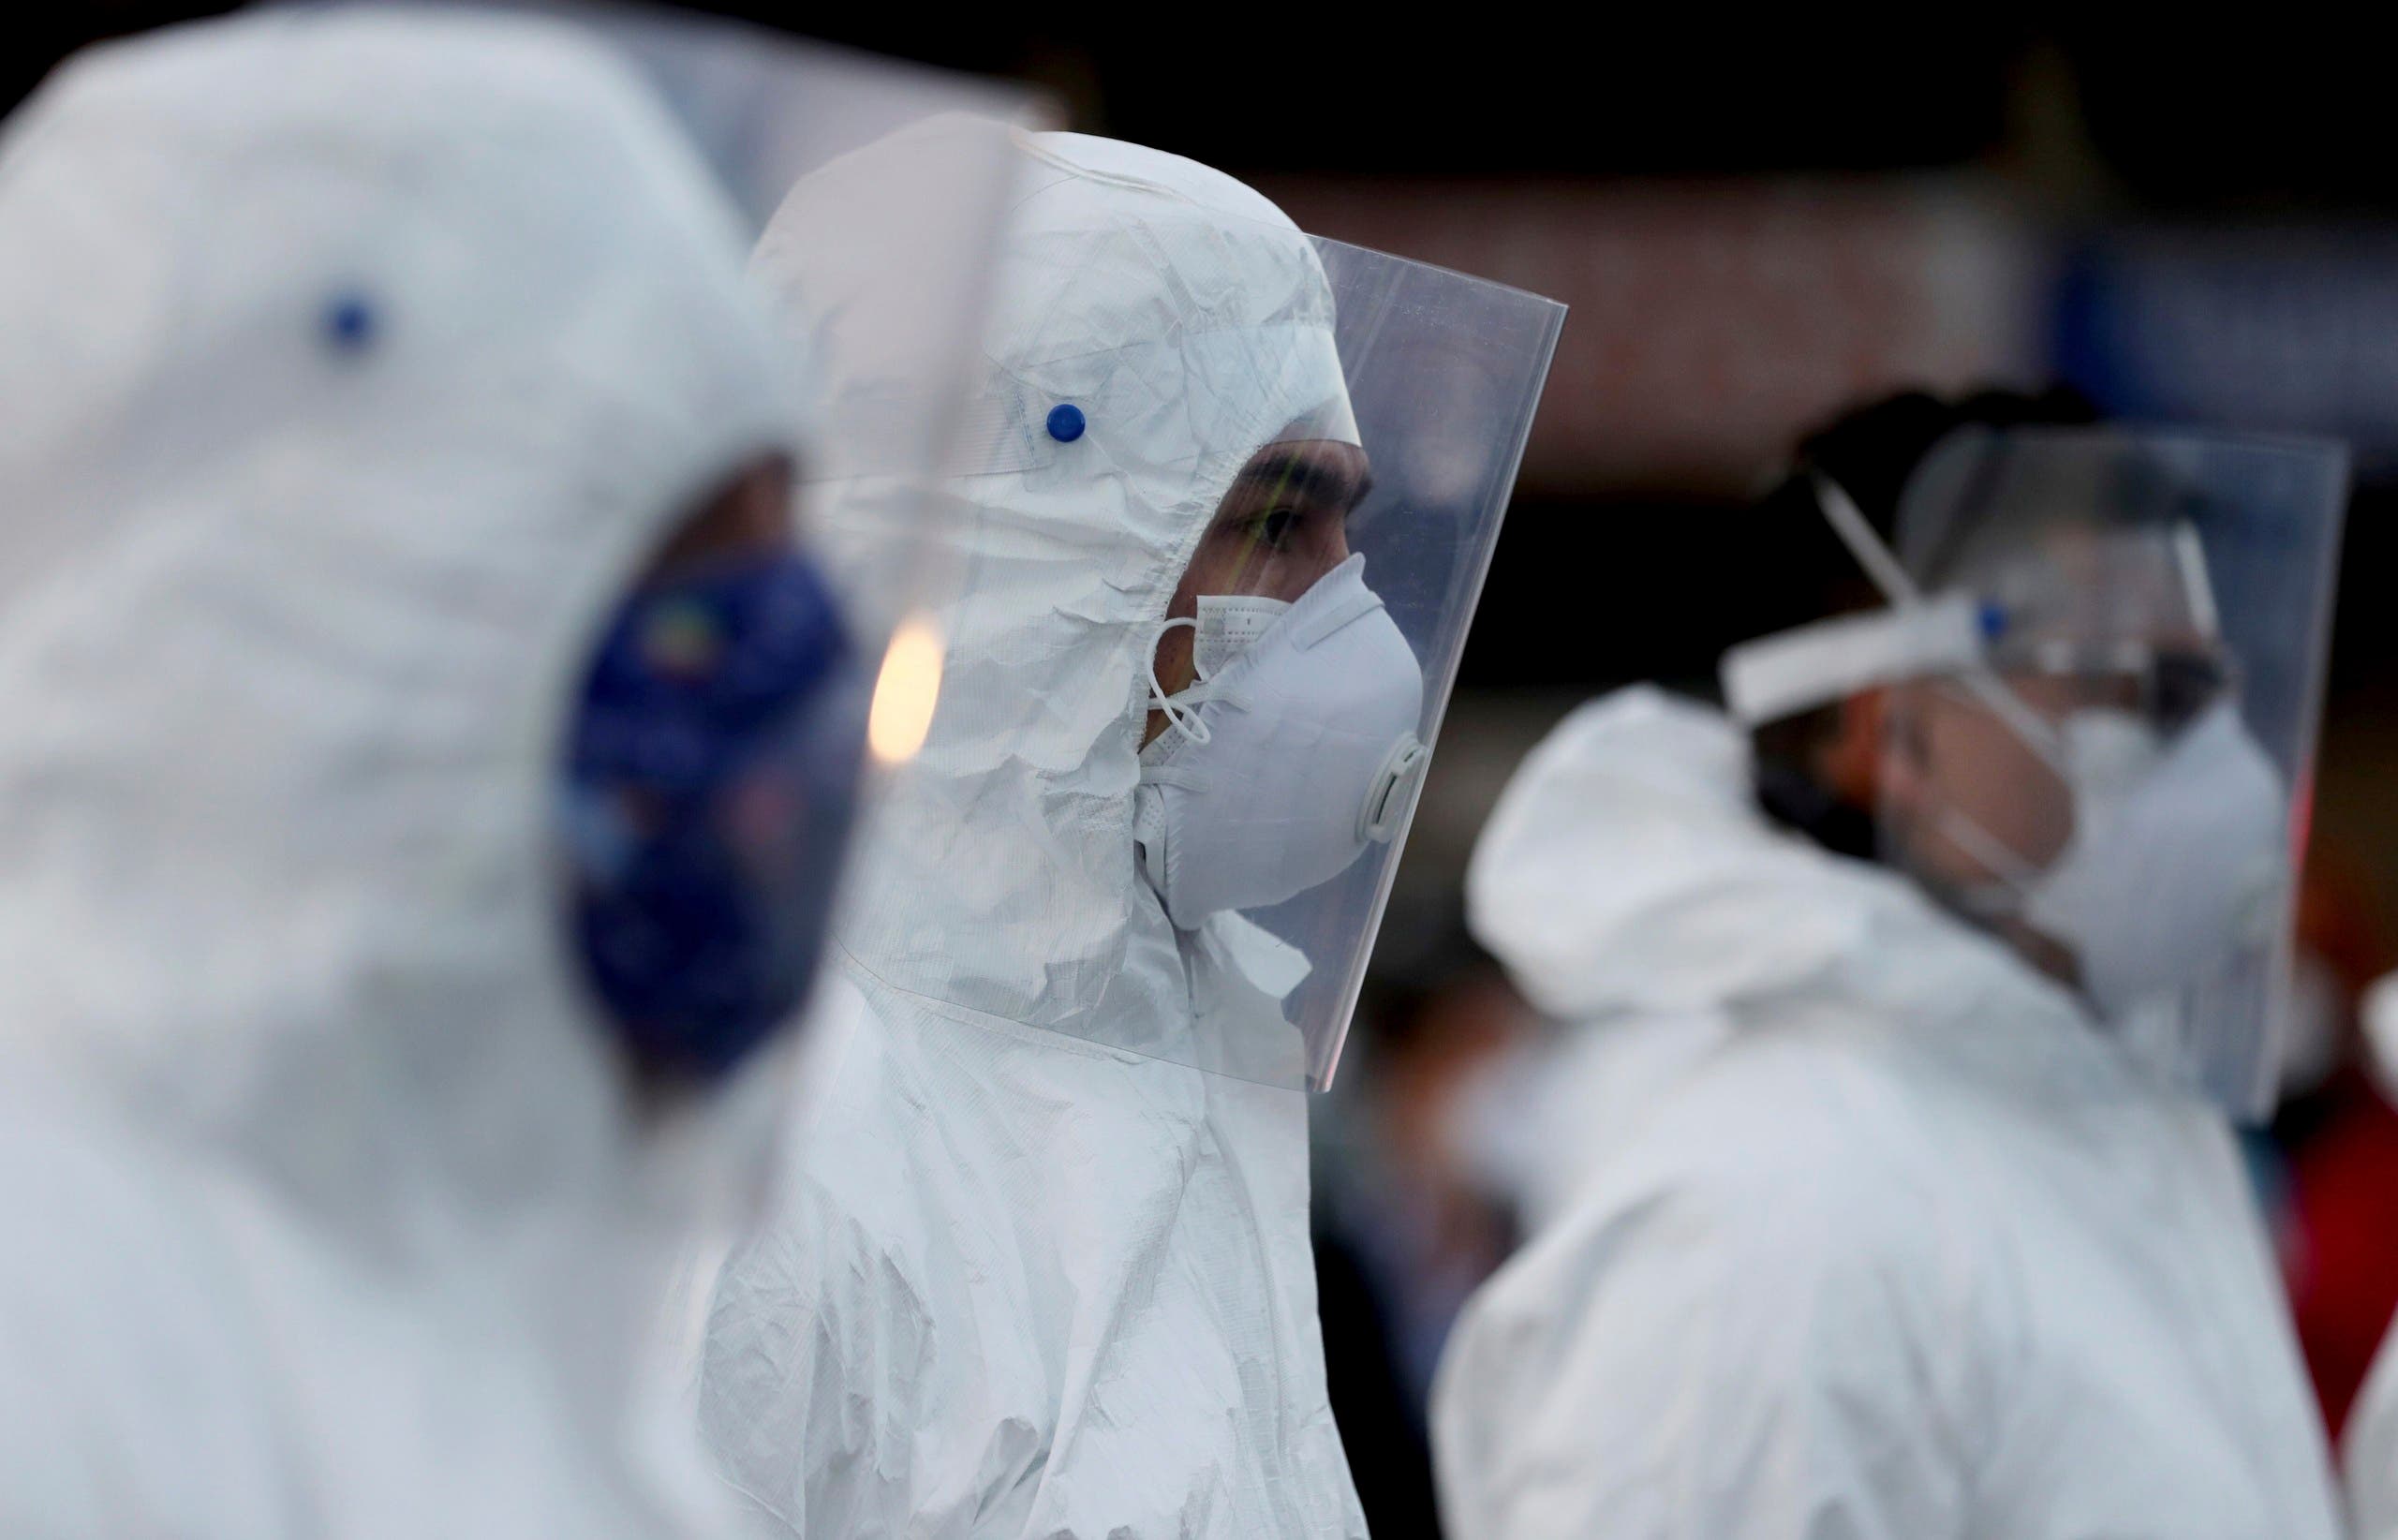  Workers wearing a protective suits stand ready to clean at Corabastos, one of Latin America's largest food distribution centers, in an effort to contain the spread of the new coronavirus in Bogota, Colombia on April 10, 2020. (AP)